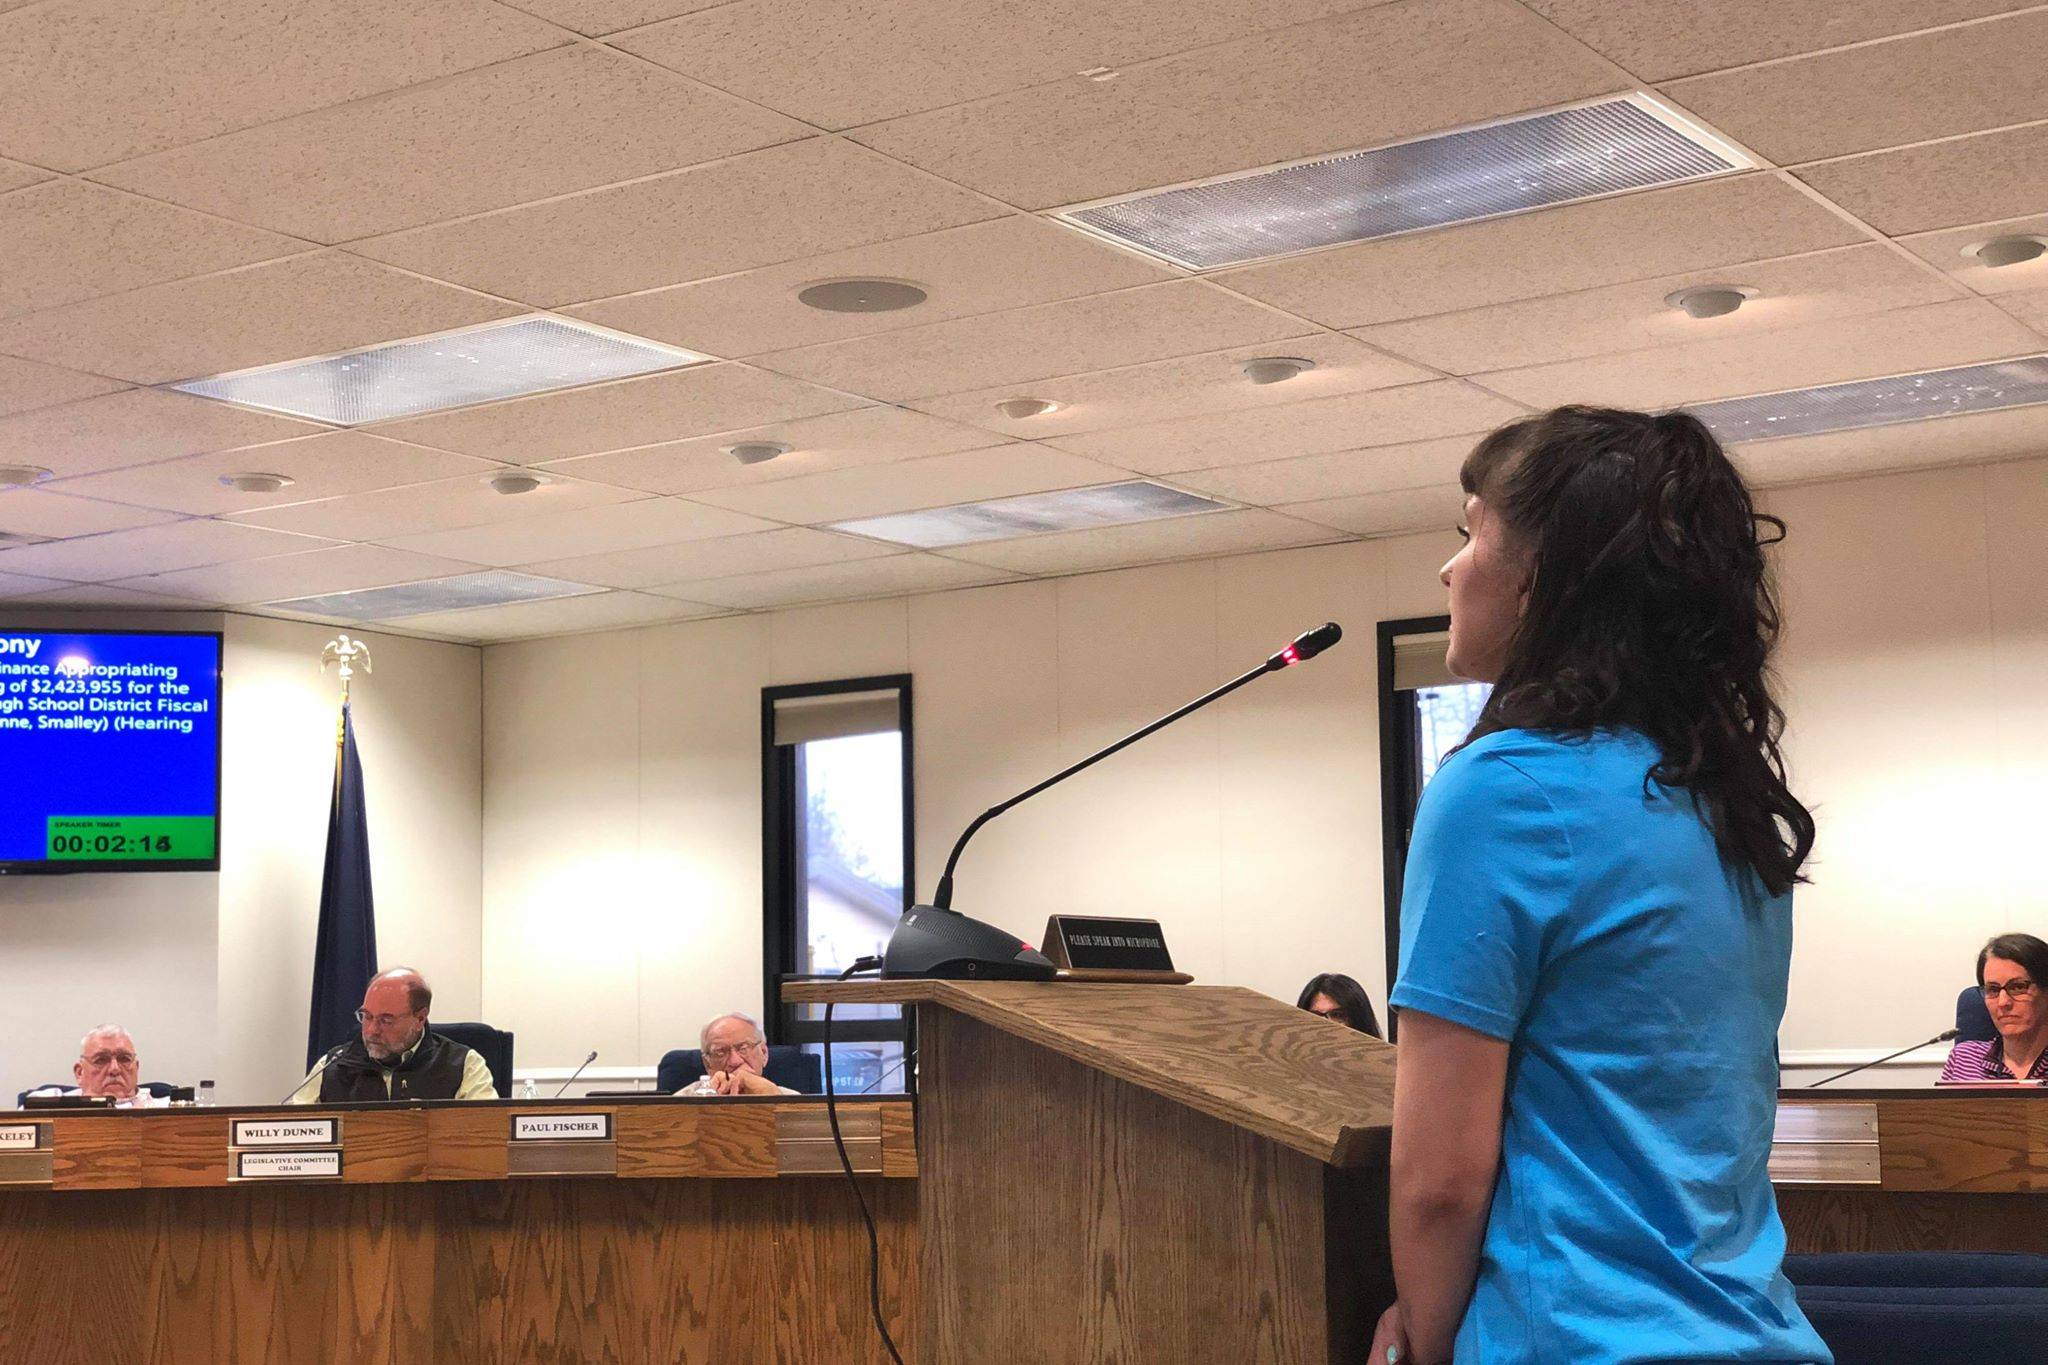 First-year Chapman School teacher Malia Larson speaks to the Kenai Peninsula Borough Assembly in support of an ordinance that will appropriate around $2.4 million to the school district in hopes of retaining some non-tenured teachers for the next school year in Soldotna, Alaska, on Tuesday, April 2, 2019. (Photo by Victoria Petersen/Peninsula Clarion)